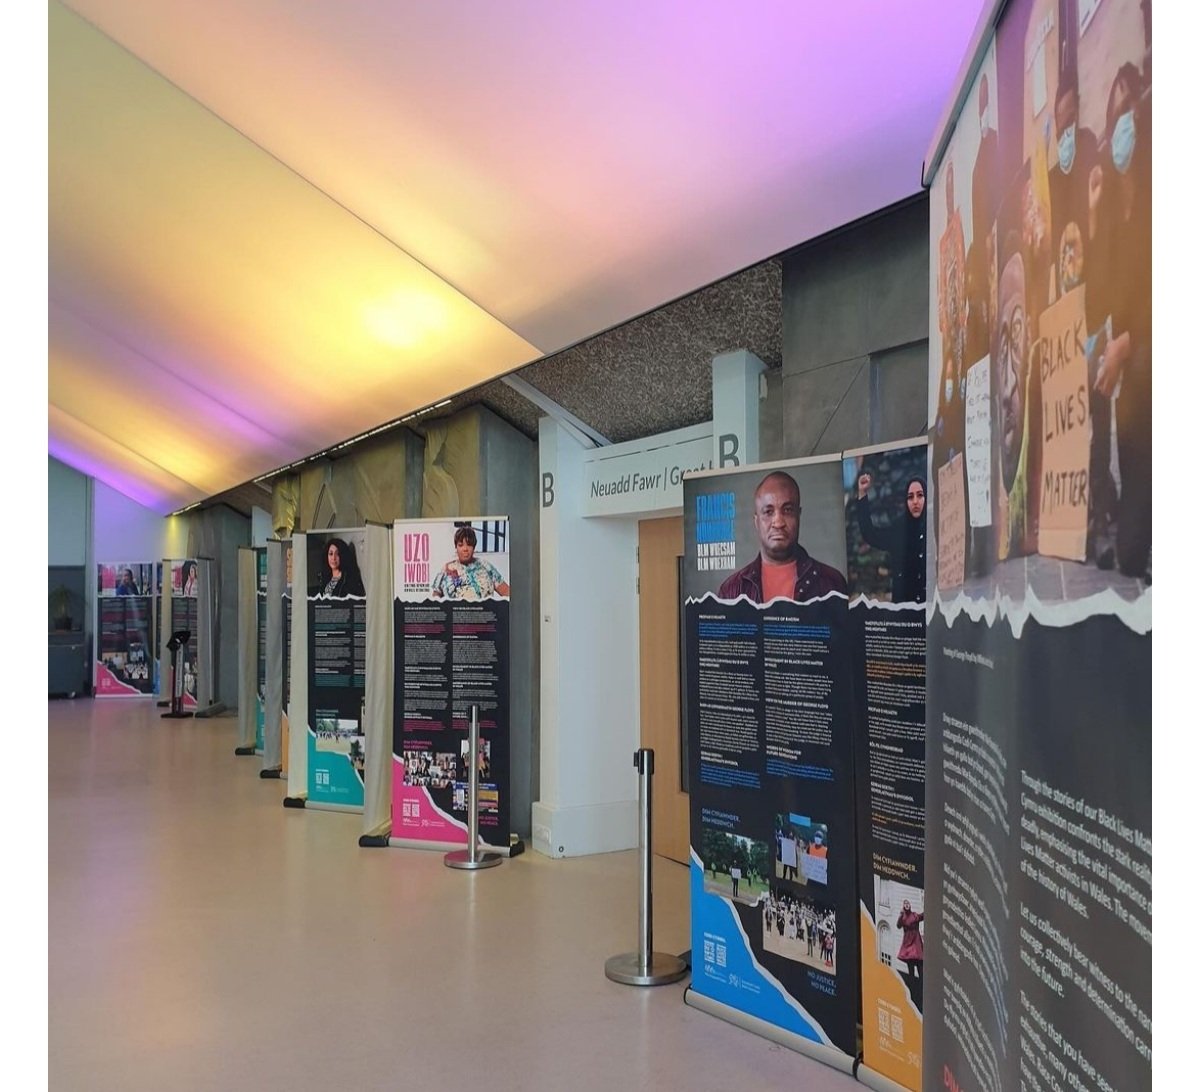 Discover the inspiring stories of Black Lives Matter activists at Aberystwyth Arts Centre, @AberUni, leading the charge against racism and inequality in Wales. Dive into their stories and experiences. Don't miss the opportunity to visit the Arts Centre today and show your support…